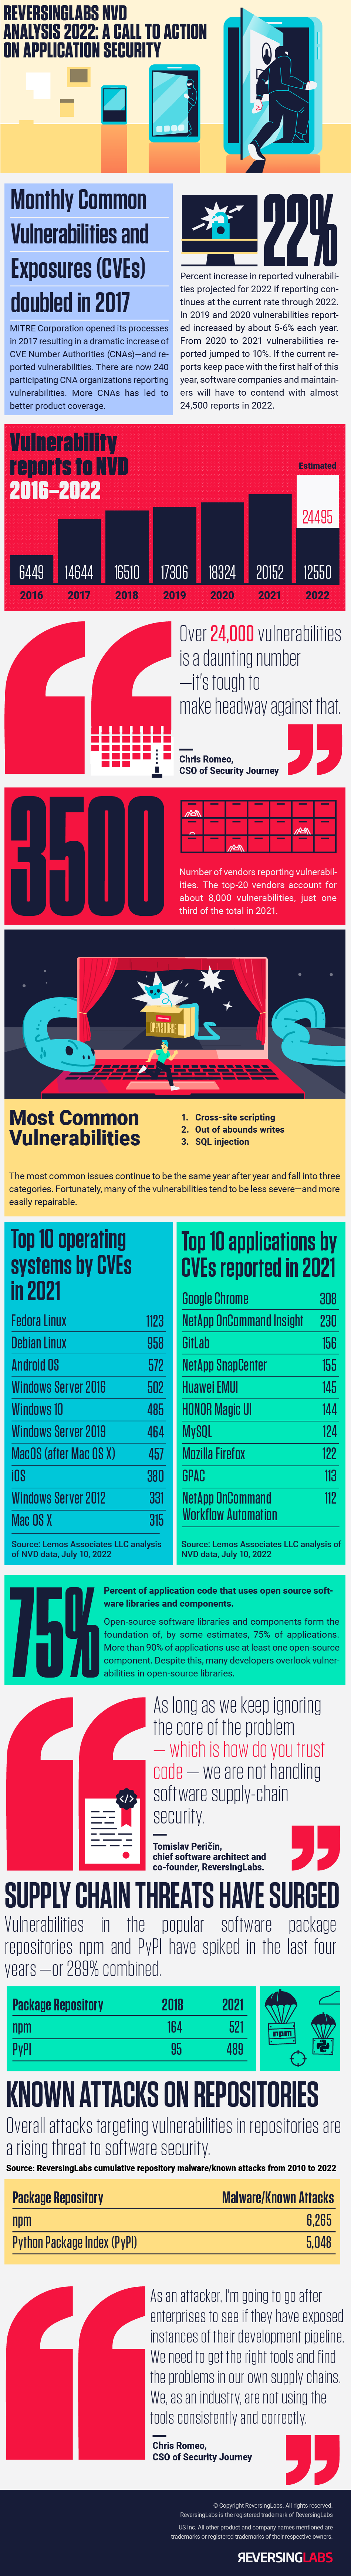 ReversingLabs NVD Analysis 2022: A Call to Action on Software Supply Chain Security